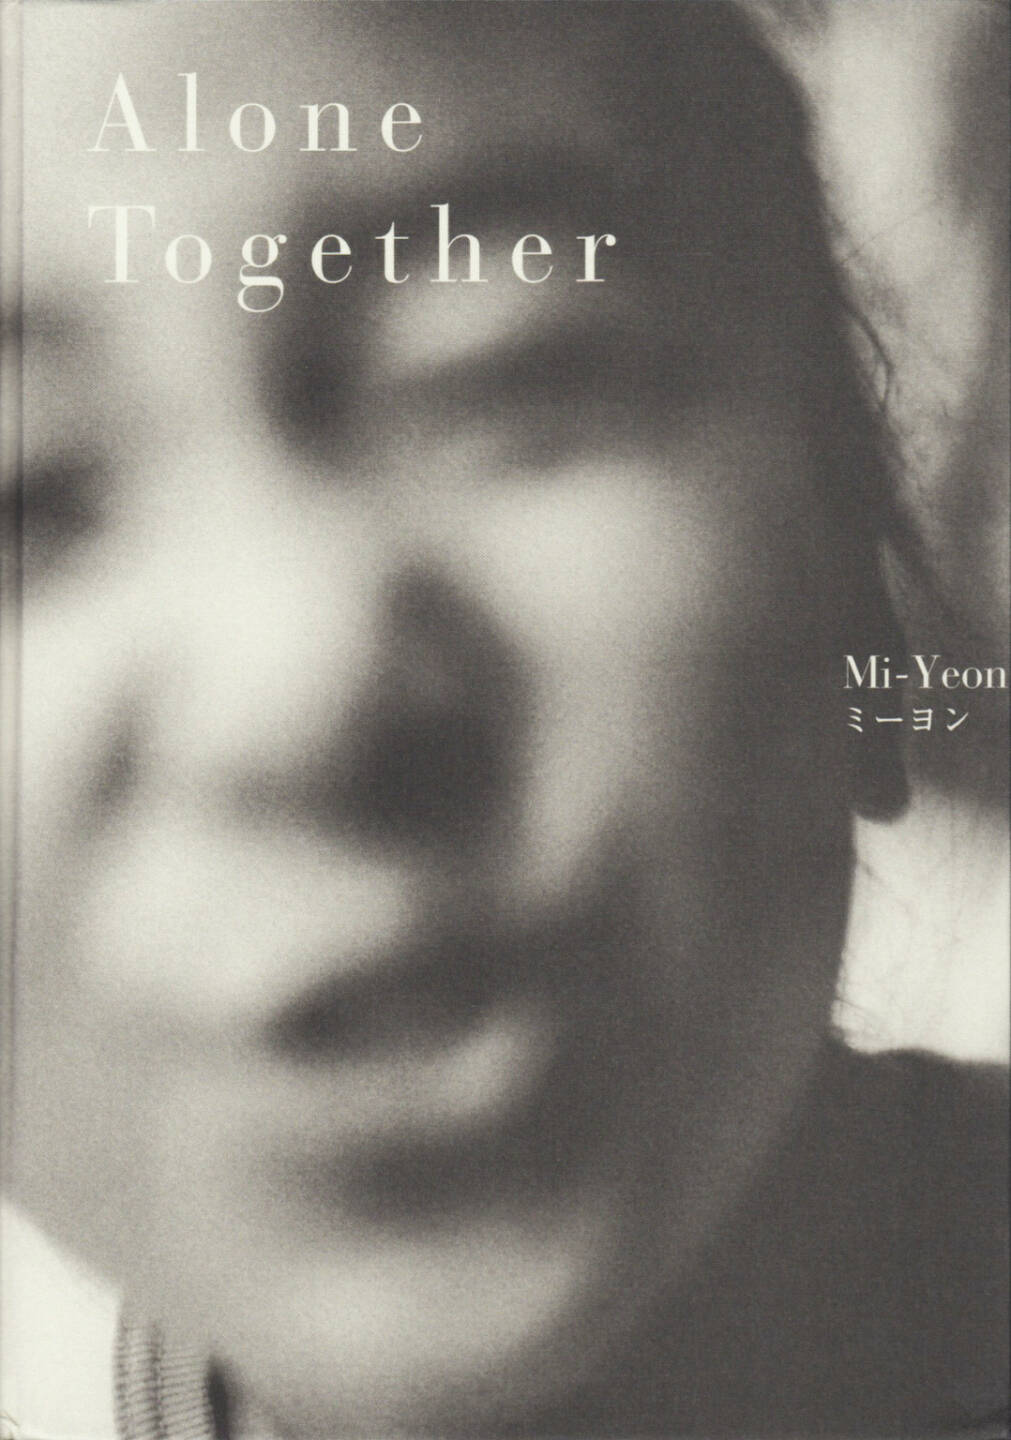 Mi-Yeon - Alone Together, kaya books, 2014, Cover - http://josefchladek.com/book/mi-yeon_-_alone_together